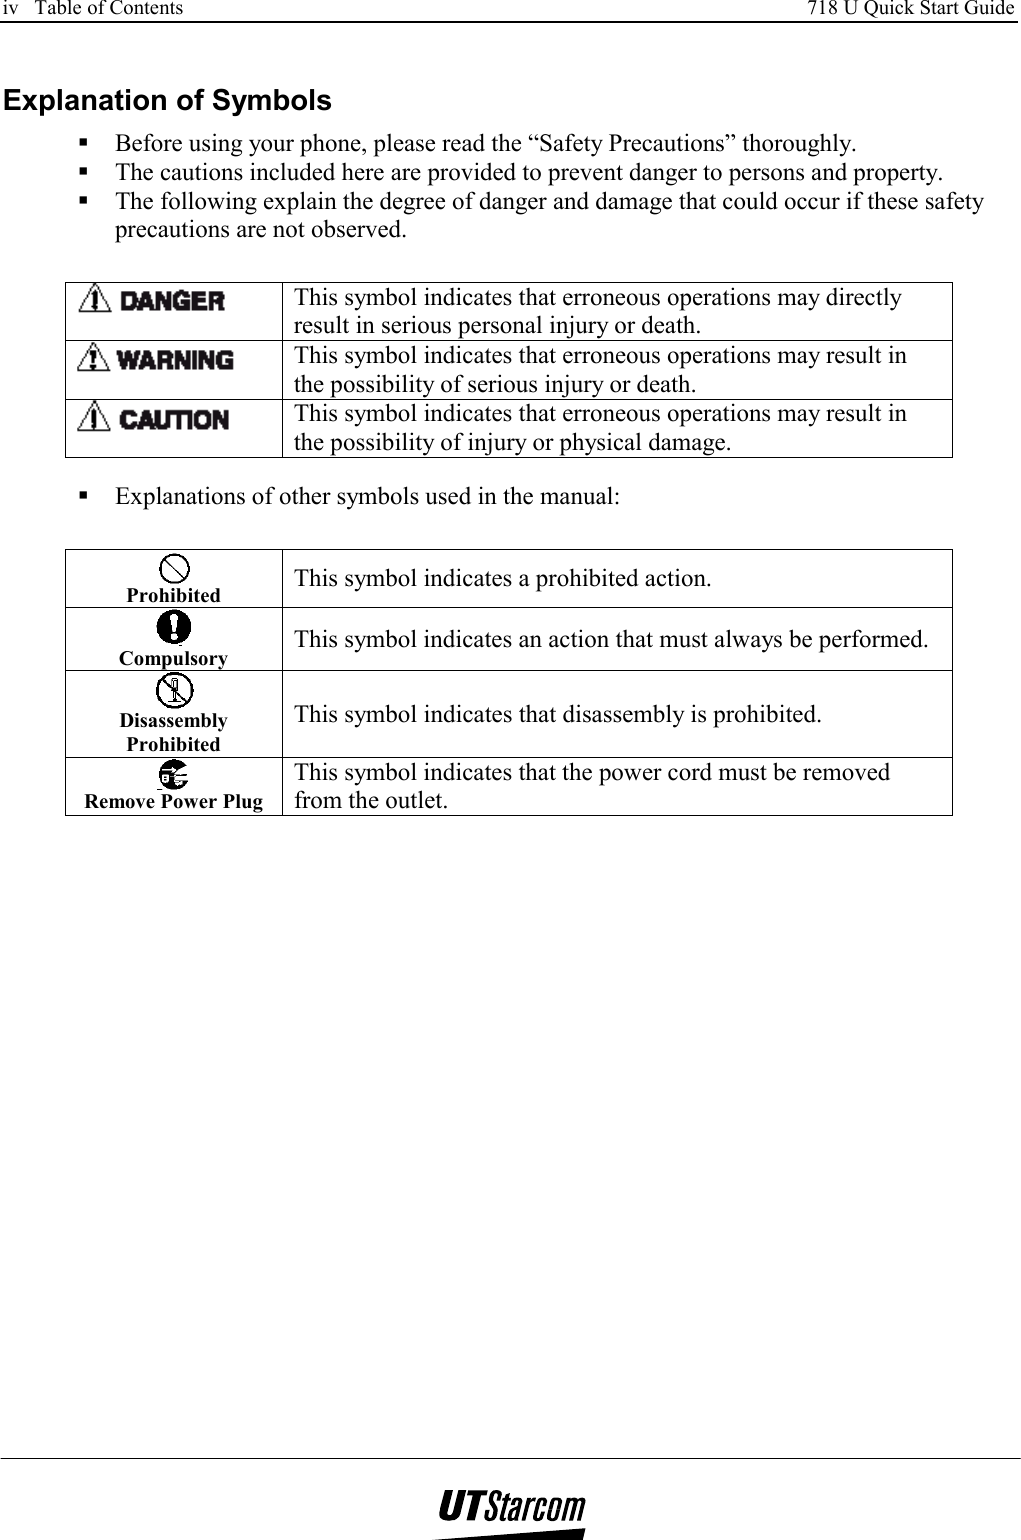 iv   Table of Contents     718 U Quick Start Guide      Explanation of Symbols  Before using your phone, please read the “Safety Precautions” thoroughly.  The cautions included here are provided to prevent danger to persons and property.  The following explain the degree of danger and damage that could occur if these safety precautions are not observed.   This symbol indicates that erroneous operations may directly result in serious personal injury or death.  This symbol indicates that erroneous operations may result in the possibility of serious injury or death.  This symbol indicates that erroneous operations may result in the possibility of injury or physical damage.   Explanations of other symbols used in the manual:  Prohibited   This symbol indicates a prohibited action.  Compulsory  This symbol indicates an action that must always be performed.  Disassembly Prohibited This symbol indicates that disassembly is prohibited.  Remove Power Plug This symbol indicates that the power cord must be removed from the outlet.  